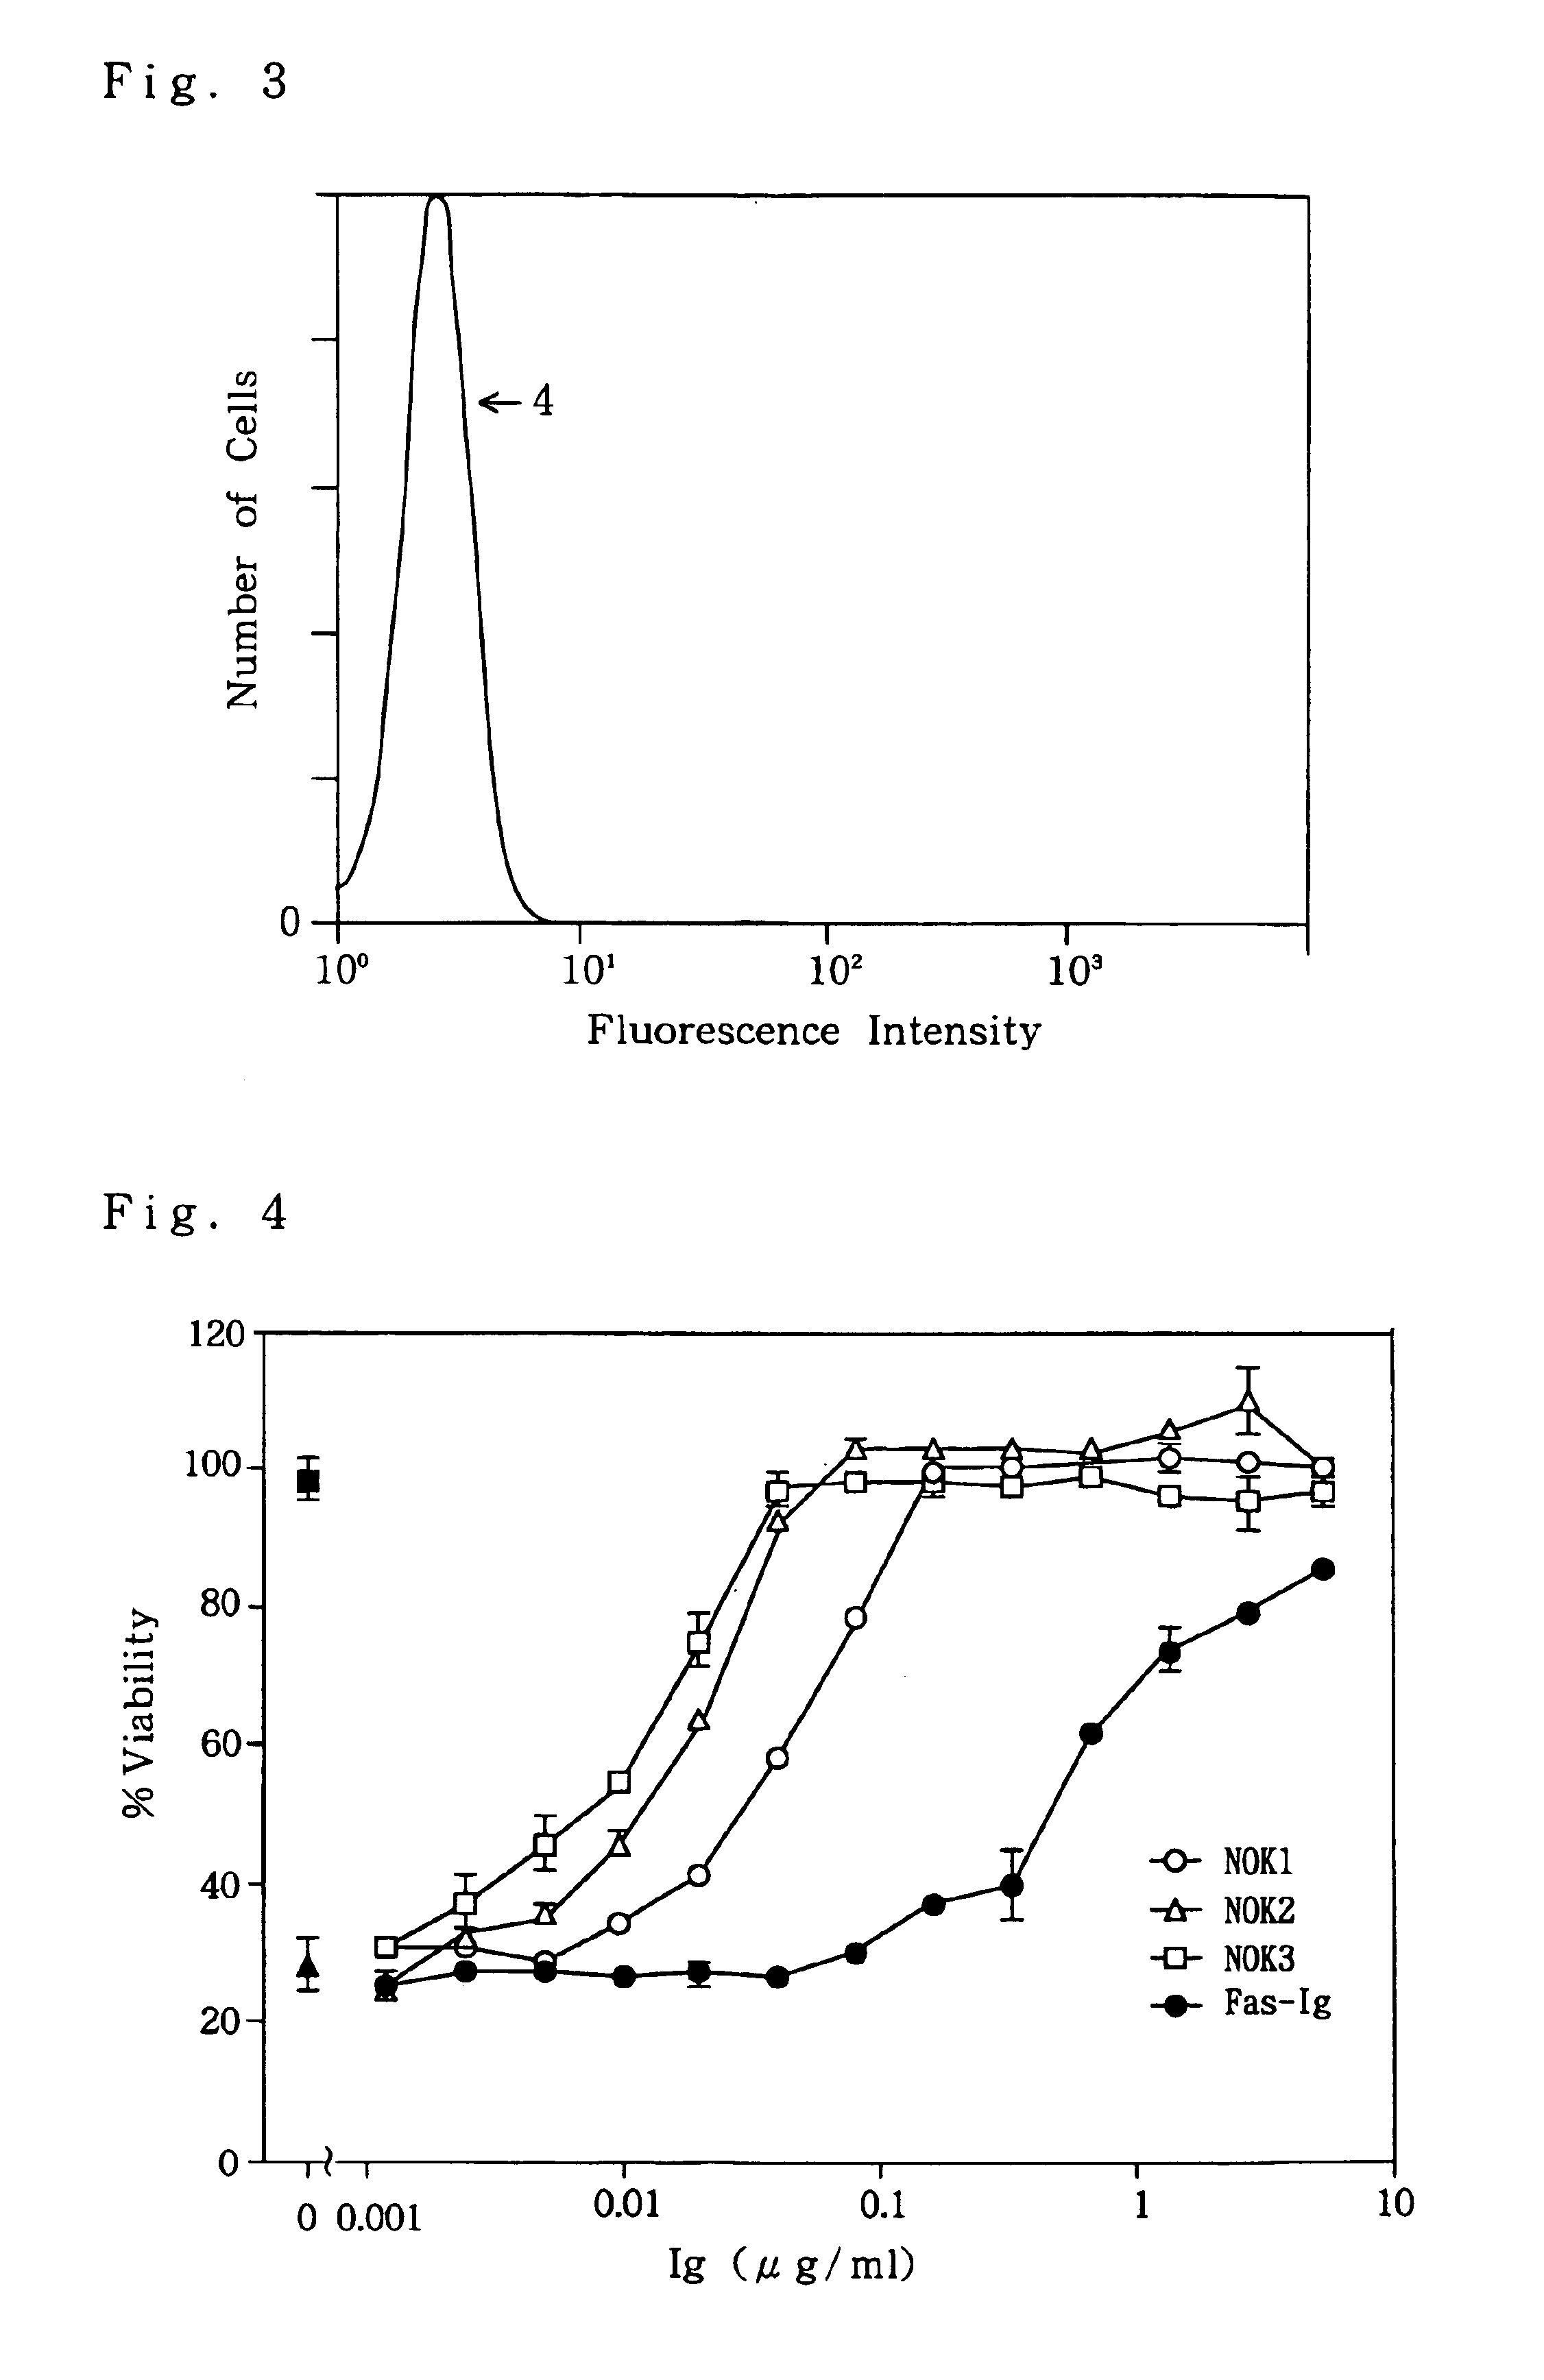 Monoclonal antibody reacting specifically reacting with Fas ligand and production process thereof